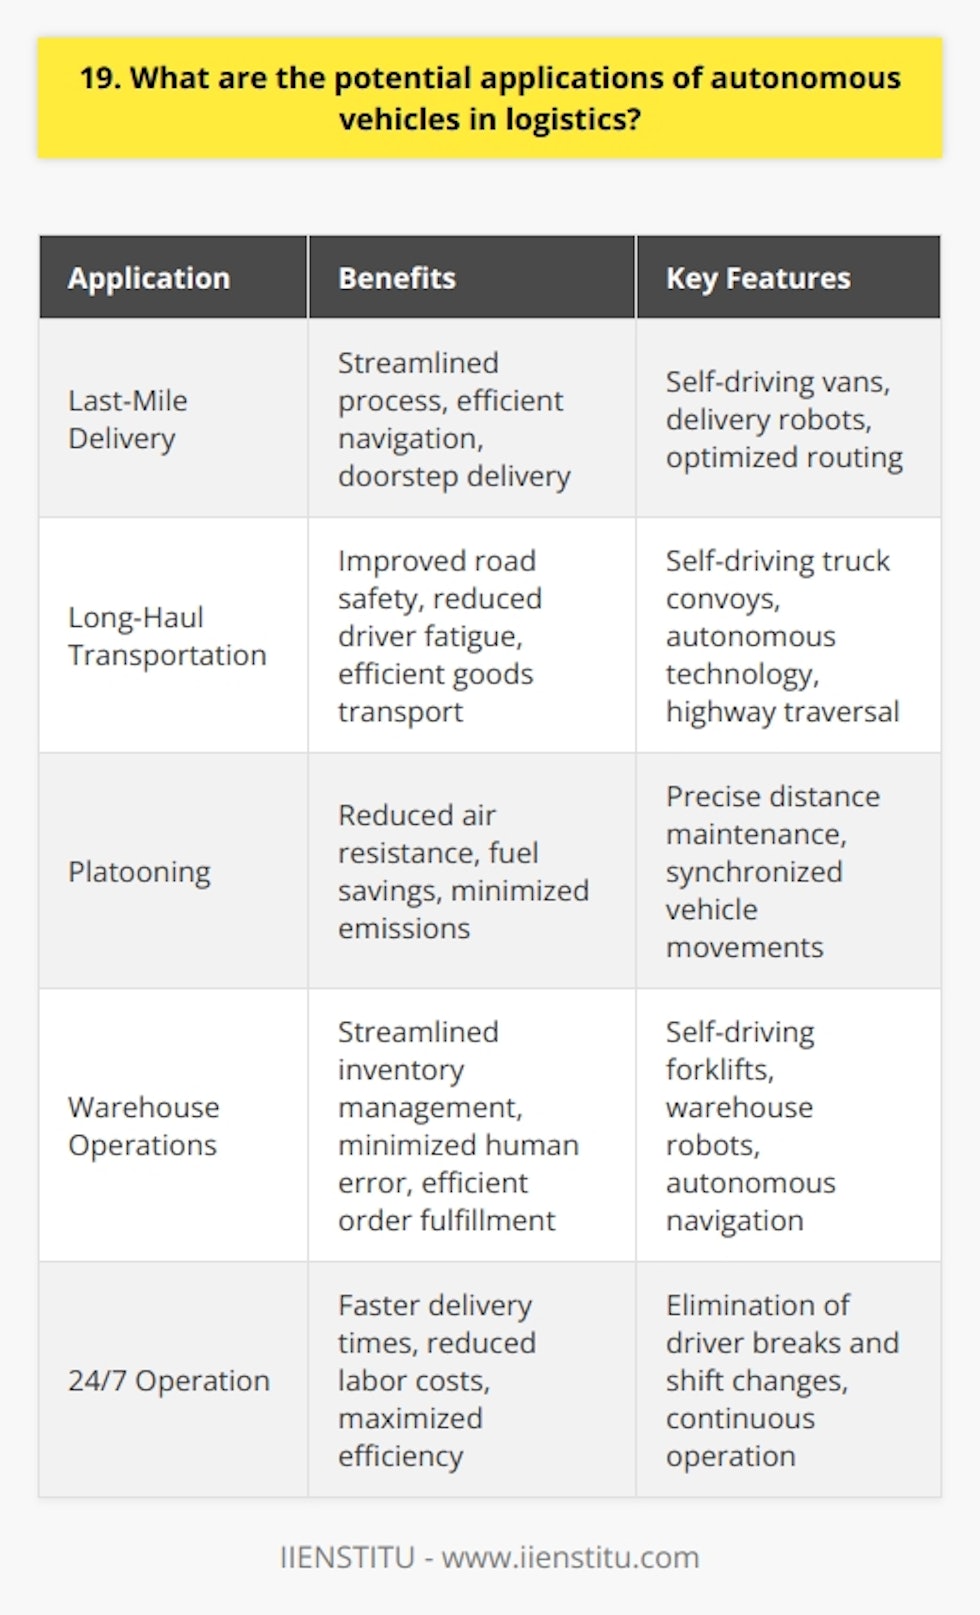 Autonomous vehicles have the potential to revolutionize logistics and transform supply chain management. They can optimize transportation, reduce costs, and enhance efficiency. Here are some key applications: Last-Mile Delivery I believe autonomous vehicles could be a game-changer for last-mile delivery. Imagine fleets of self-driving vans or robots efficiently navigating city streets, delivering packages right to customers doorsteps. This would streamline the entire process, from warehouses to final destinations. Improved Efficiency and Cost Savings By eliminating the need for human drivers, autonomous vehicles can operate 24/7 without breaks or shift changes. This means faster delivery times and reduced labor costs. Plus, optimized routing algorithms can minimize fuel consumption and maximize efficiency. Long-Haul Transportation Another exciting application is long-haul transportation. I envision convoys of self-driving trucks traversing highways, safely and efficiently transporting goods across vast distances. Autonomous technology can reduce driver fatigue and improve road safety. Platooning and Fuel Savings Platooning, where multiple trucks closely follow each other, can reduce air resistance and fuel consumption. Autonomous vehicles make this possible by maintaining precise distances and synchronizing movements. The result? Significant fuel savings and reduced emissions. Warehouse Operations Inside warehouses, autonomous vehicles can transform inventory management and order fulfillment. Self-driving forklifts and robots can navigate aisles, pick items, and transport them to designated areas. This streamlines operations and minimizes human error. The possibilities are endless, and Im excited to see how autonomous vehicles shape the future of logistics!